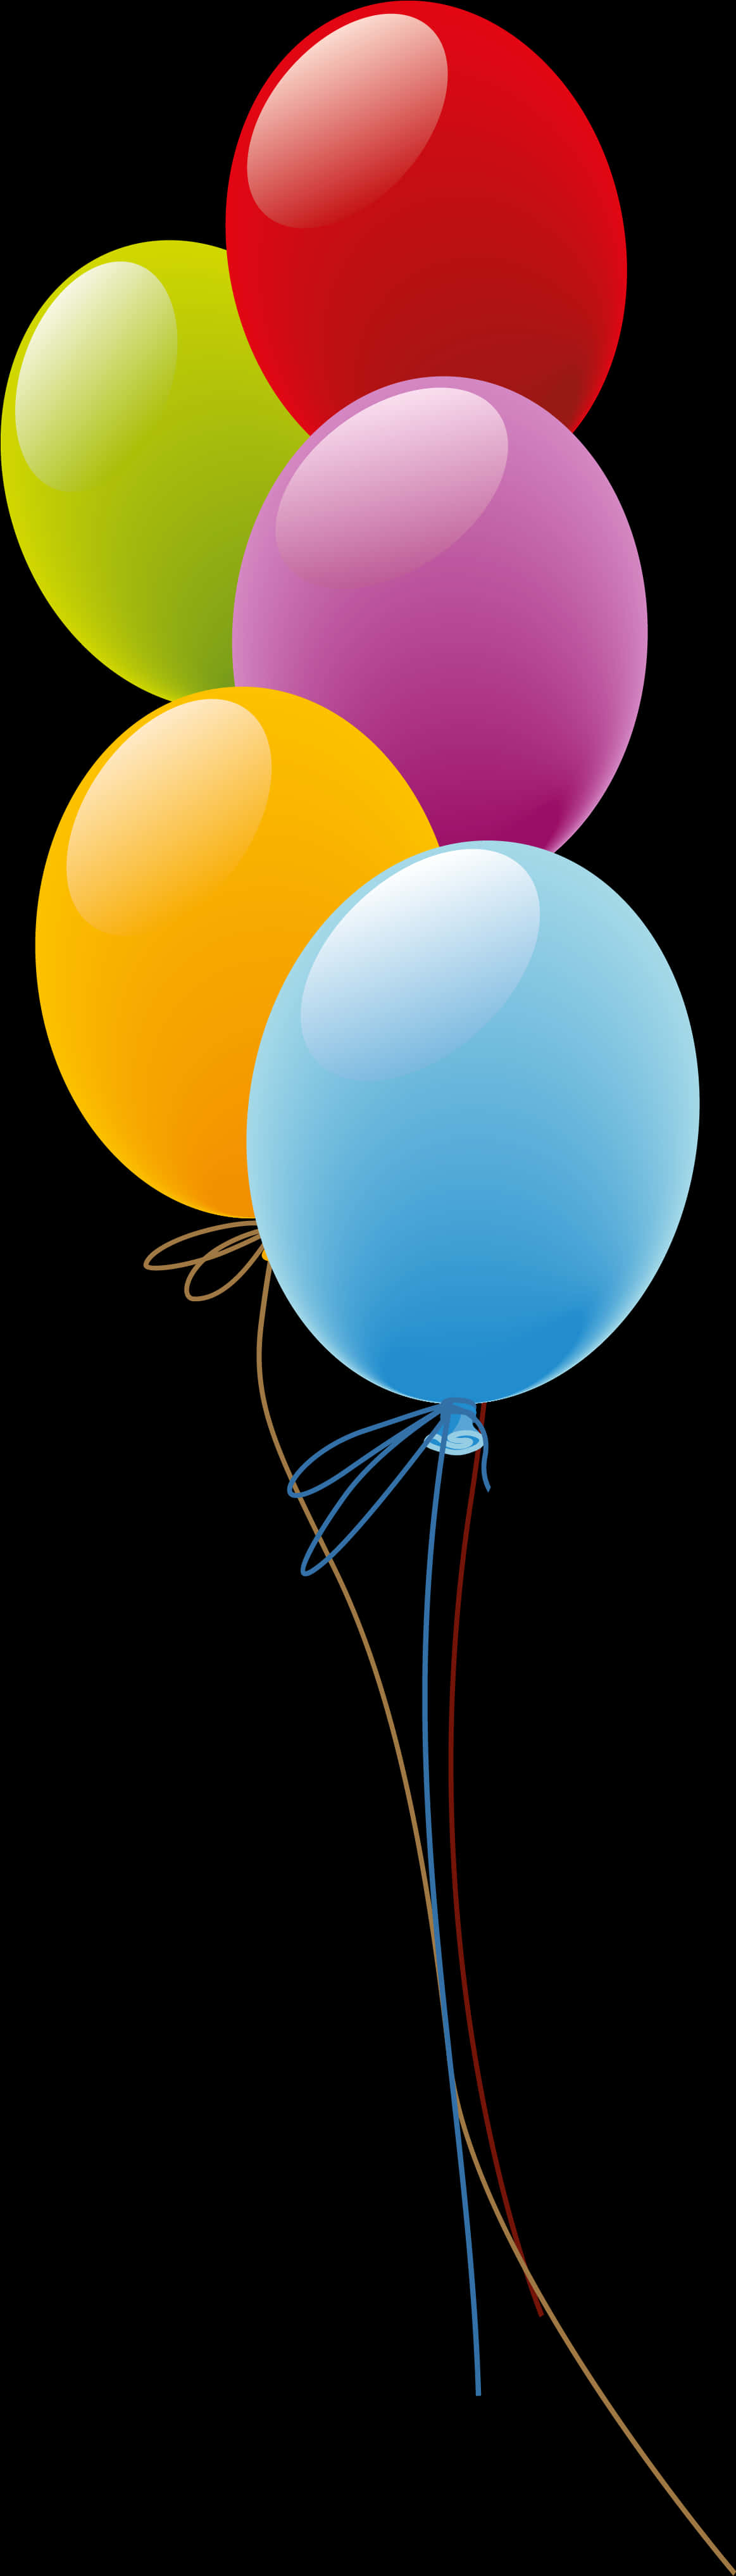 Colorful Balloons Against Black Background PNG